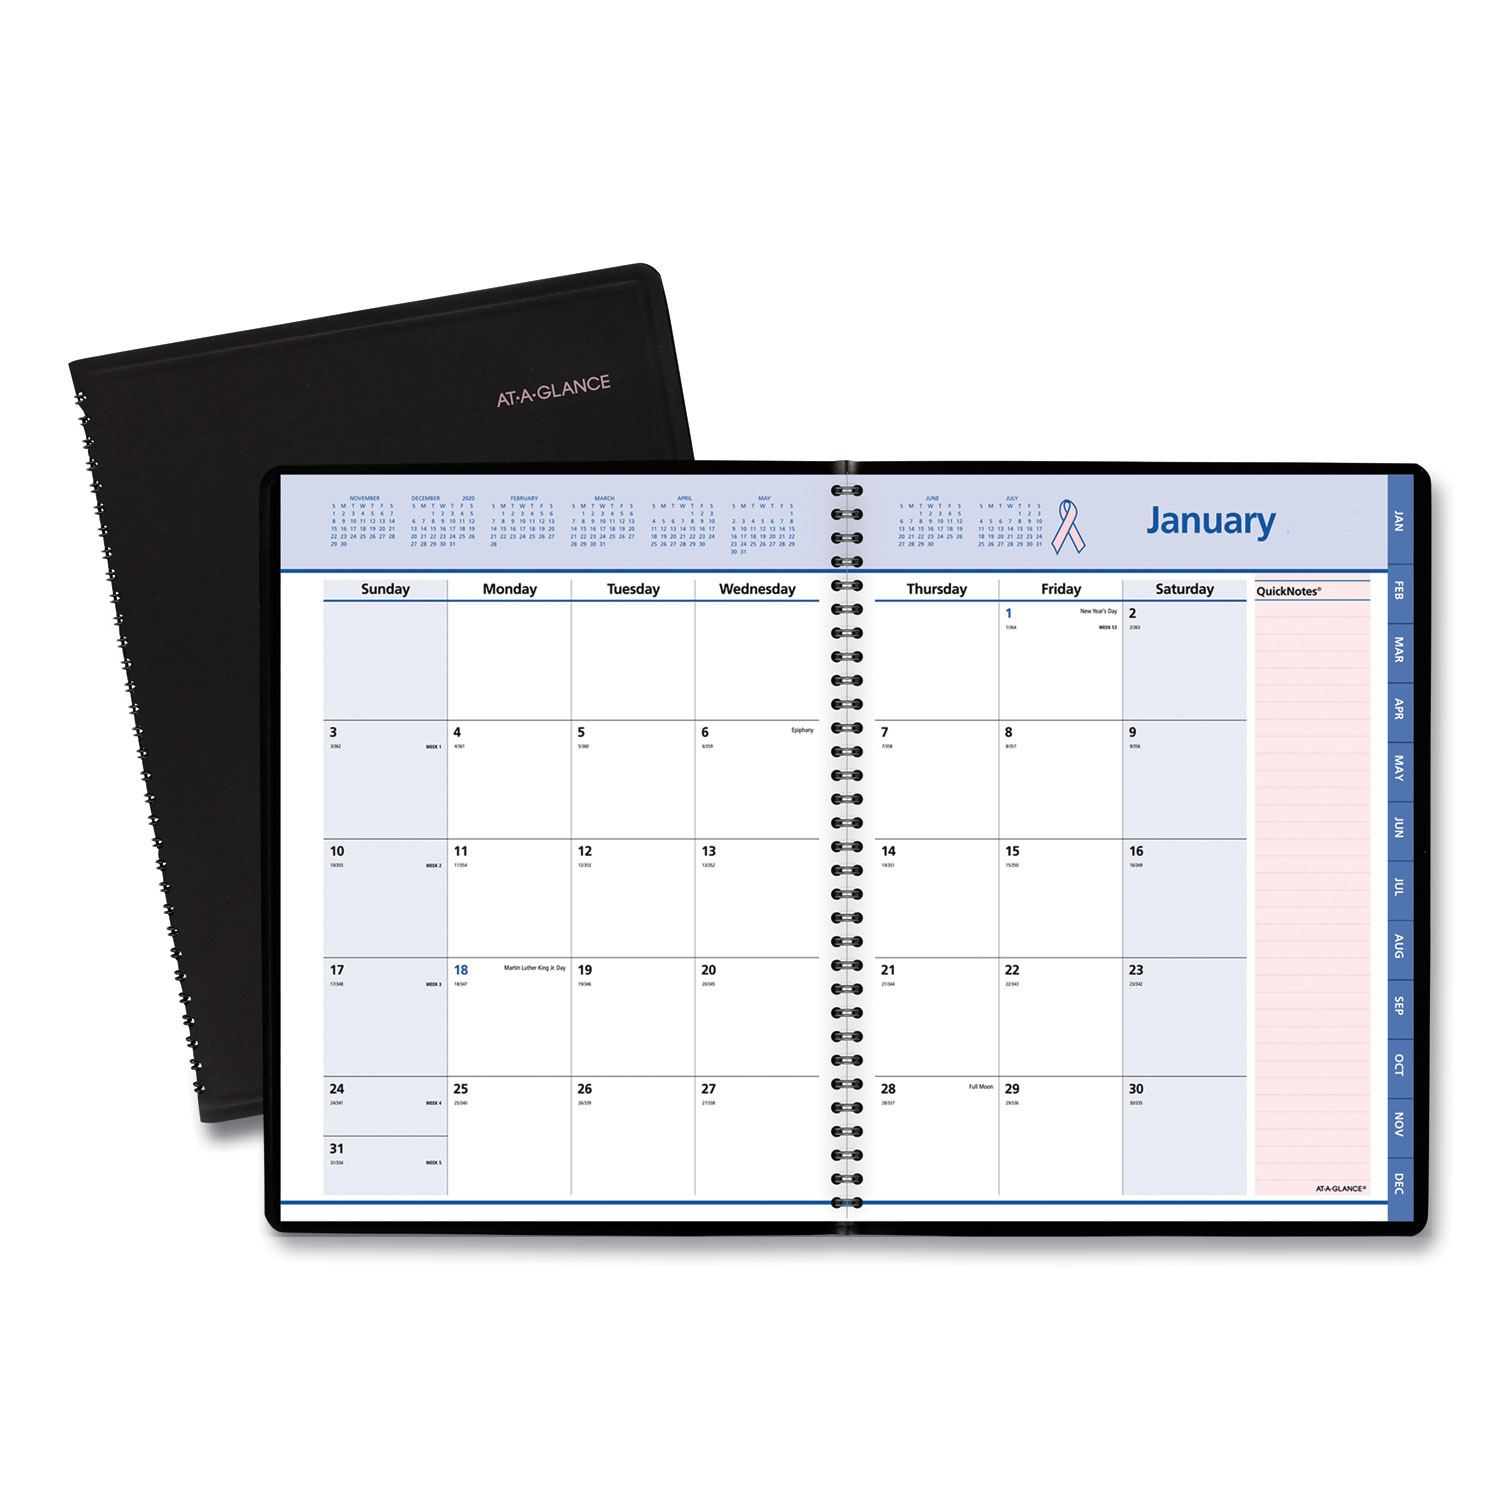  AT-A-GLANCE 76PN0605 QuickNotes Special Edition Monthly Planner, 10 7/8 x 8 1/4, Black/Pink, 2020 (AAG76PN0605) 